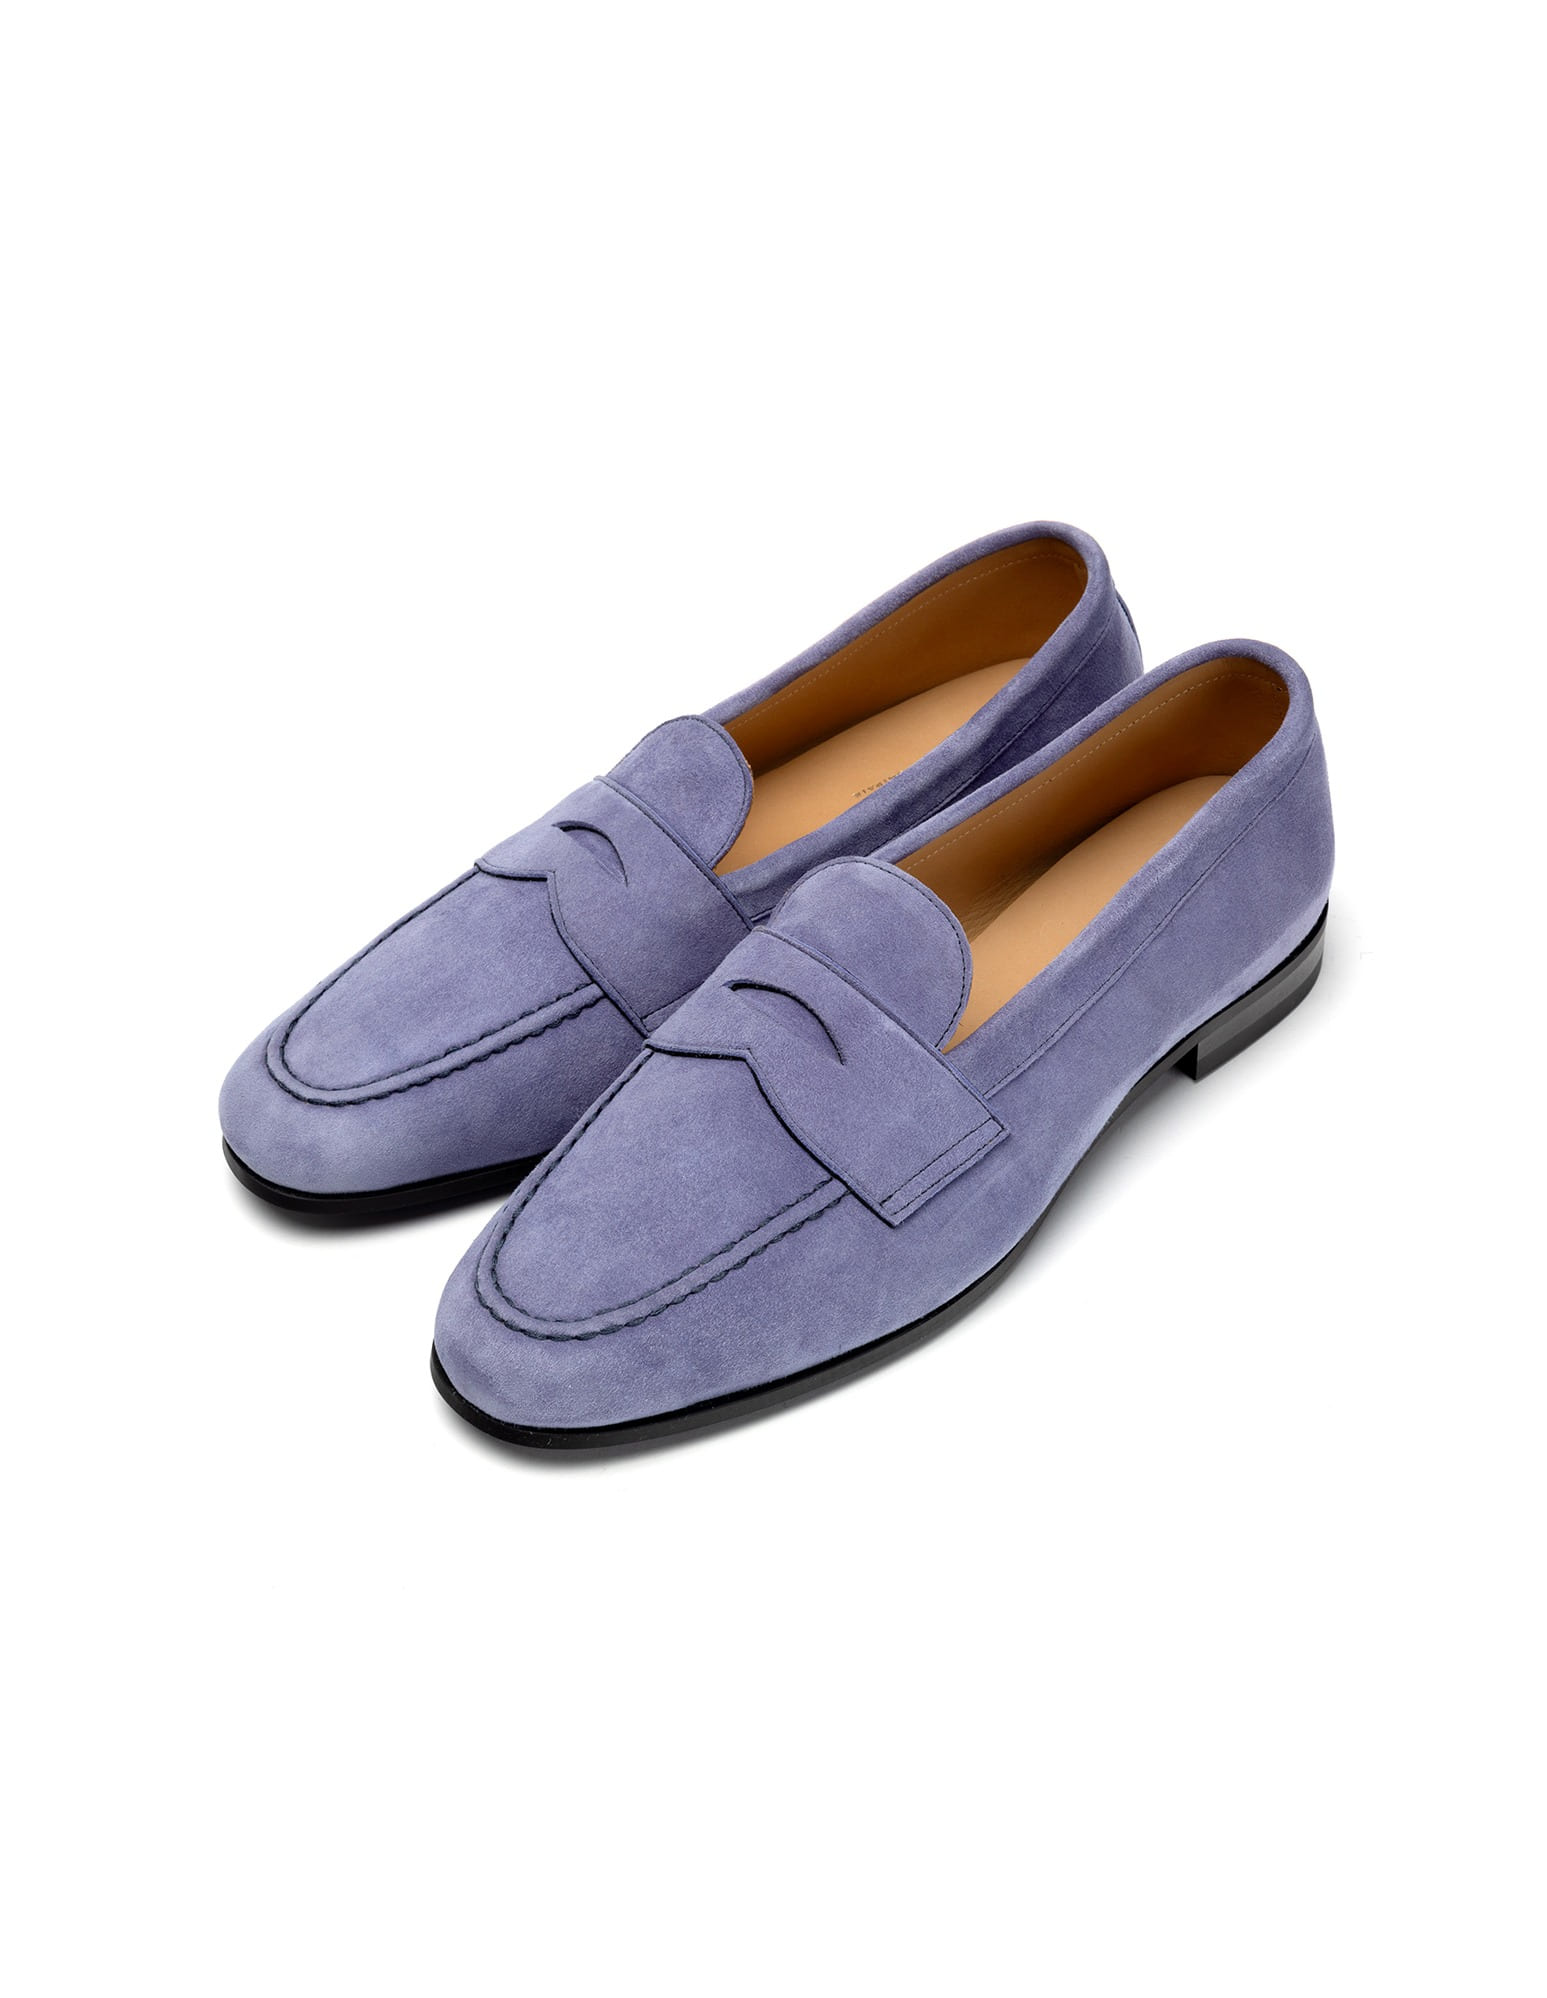 LWL(Light Weight Loafer) Suede : Penny (Purple)